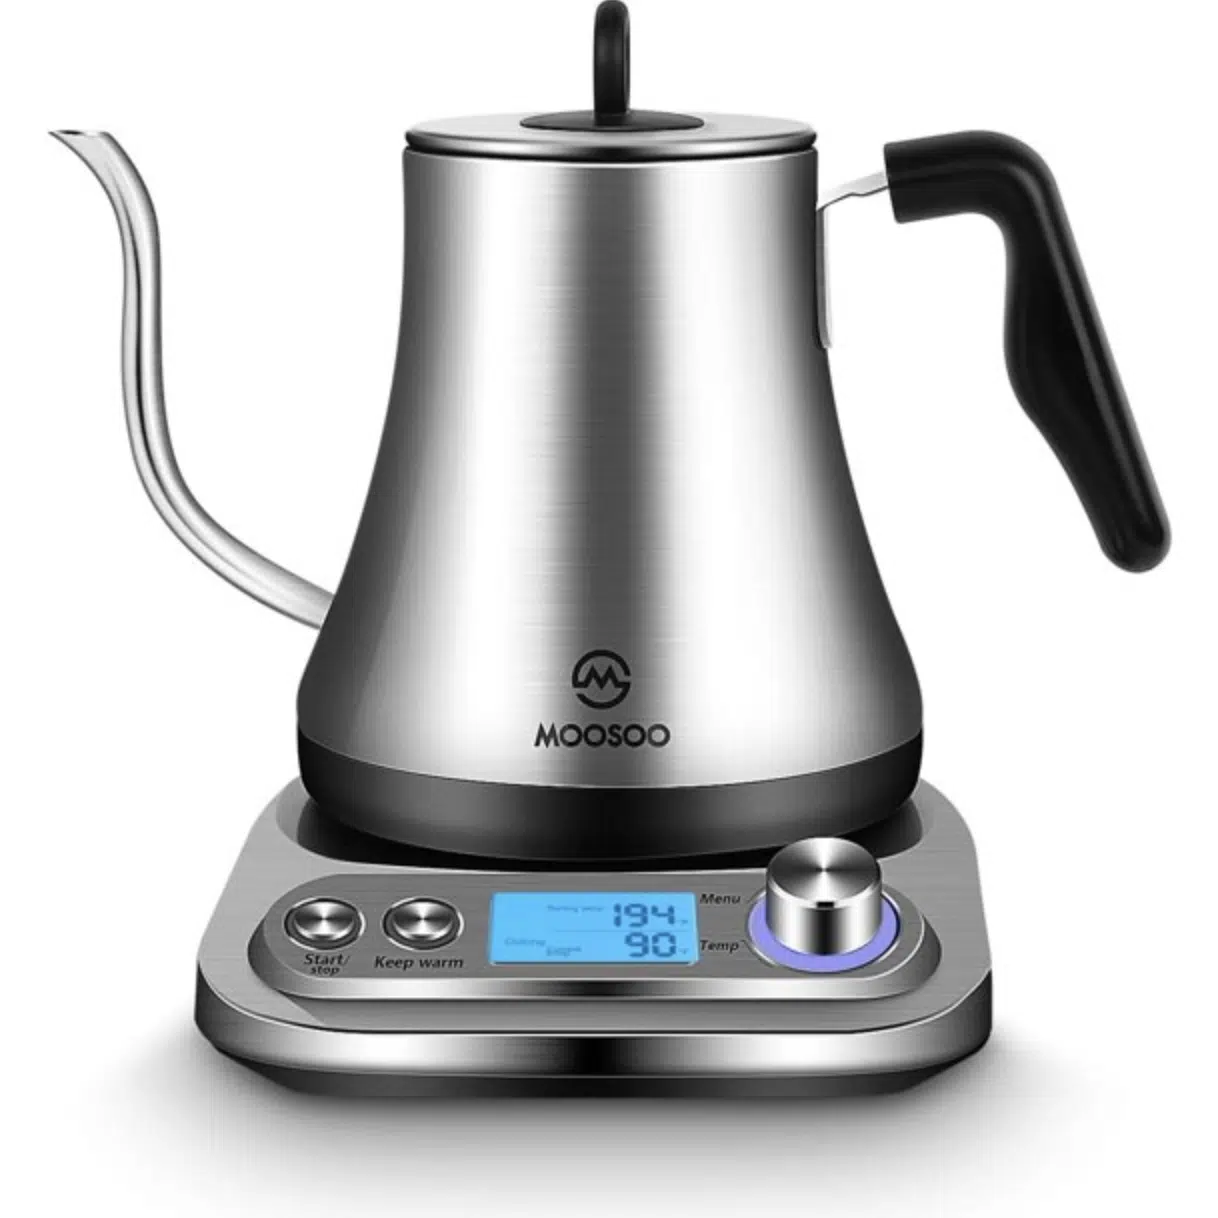 MOOSOO Electric Travel Kettle for Boiling Water, Keep Warm Function